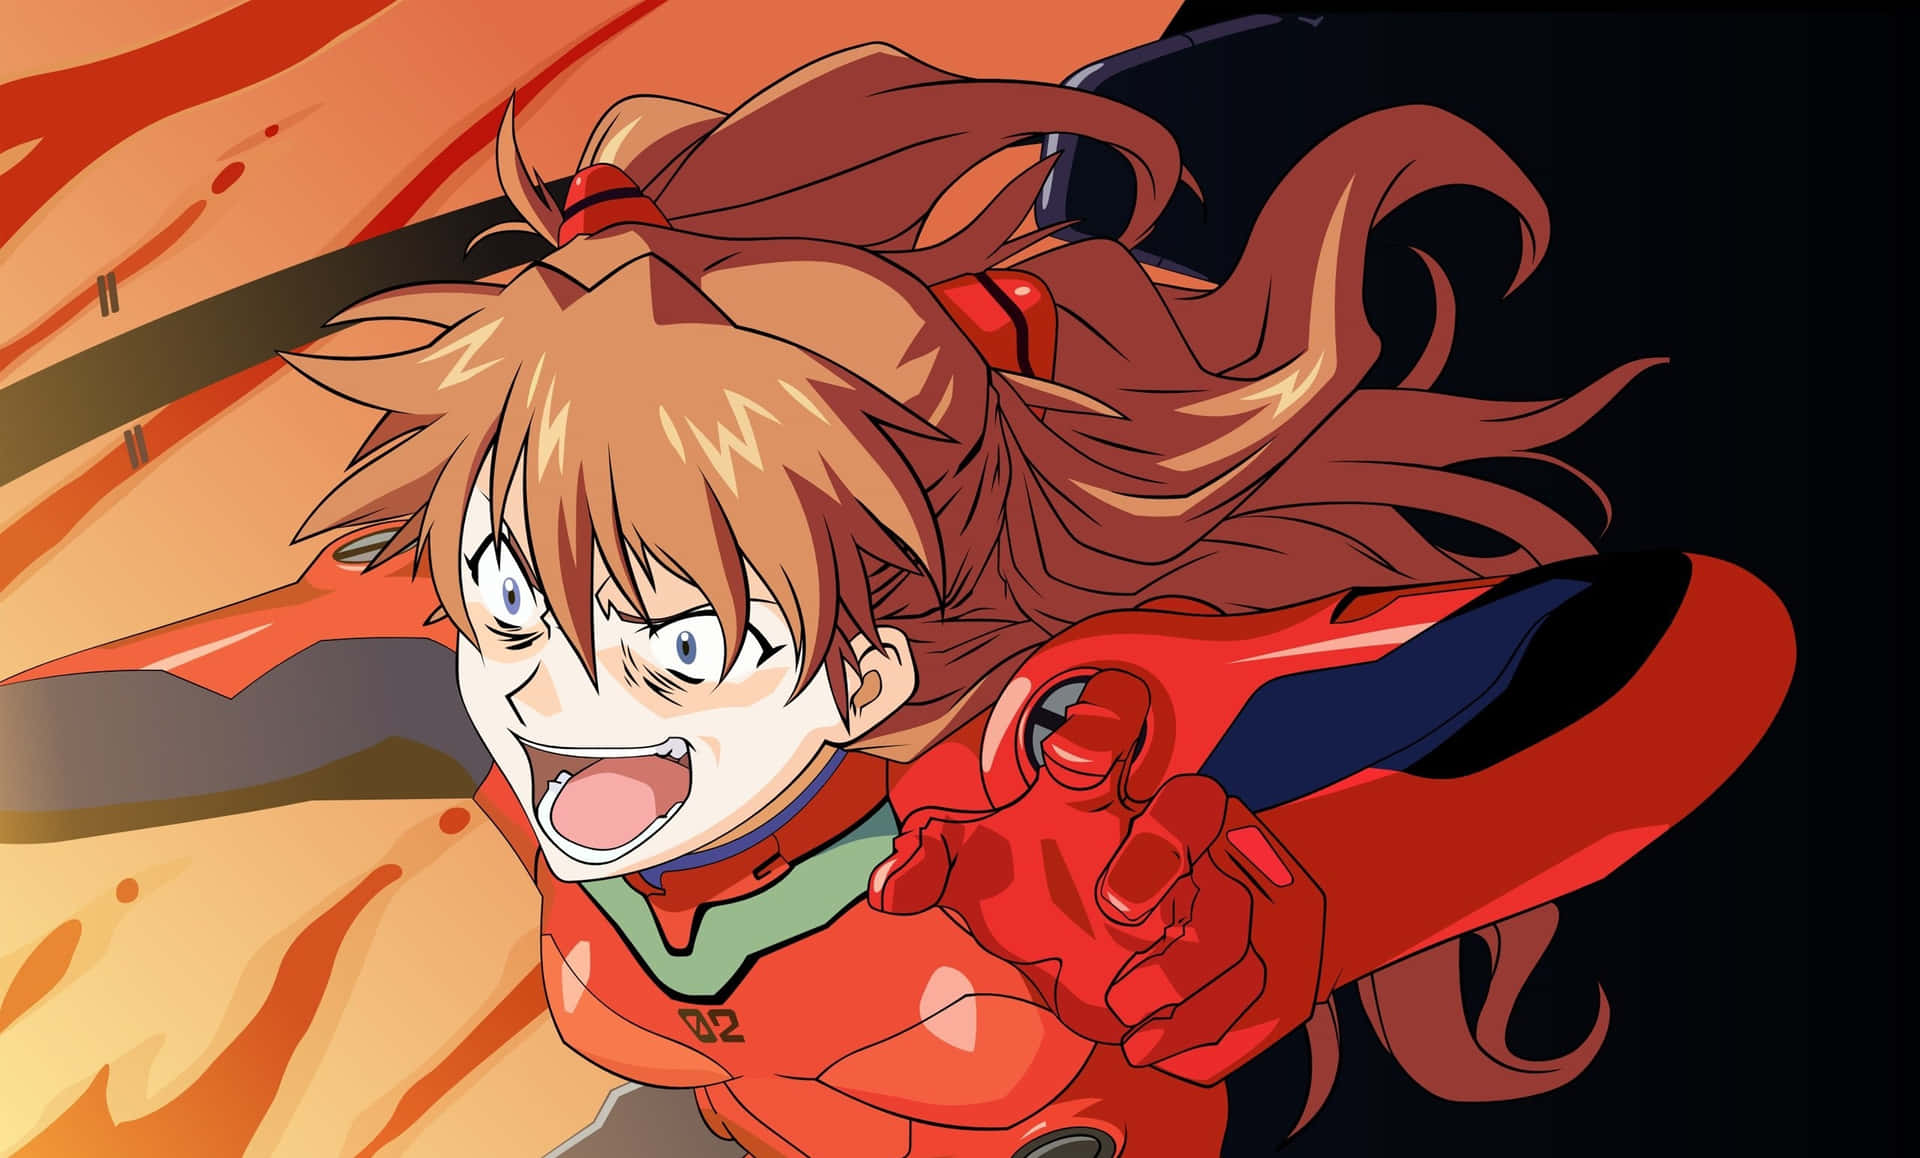 Asuka Langley Soryu standing tall in her iconic plugsuit Wallpaper